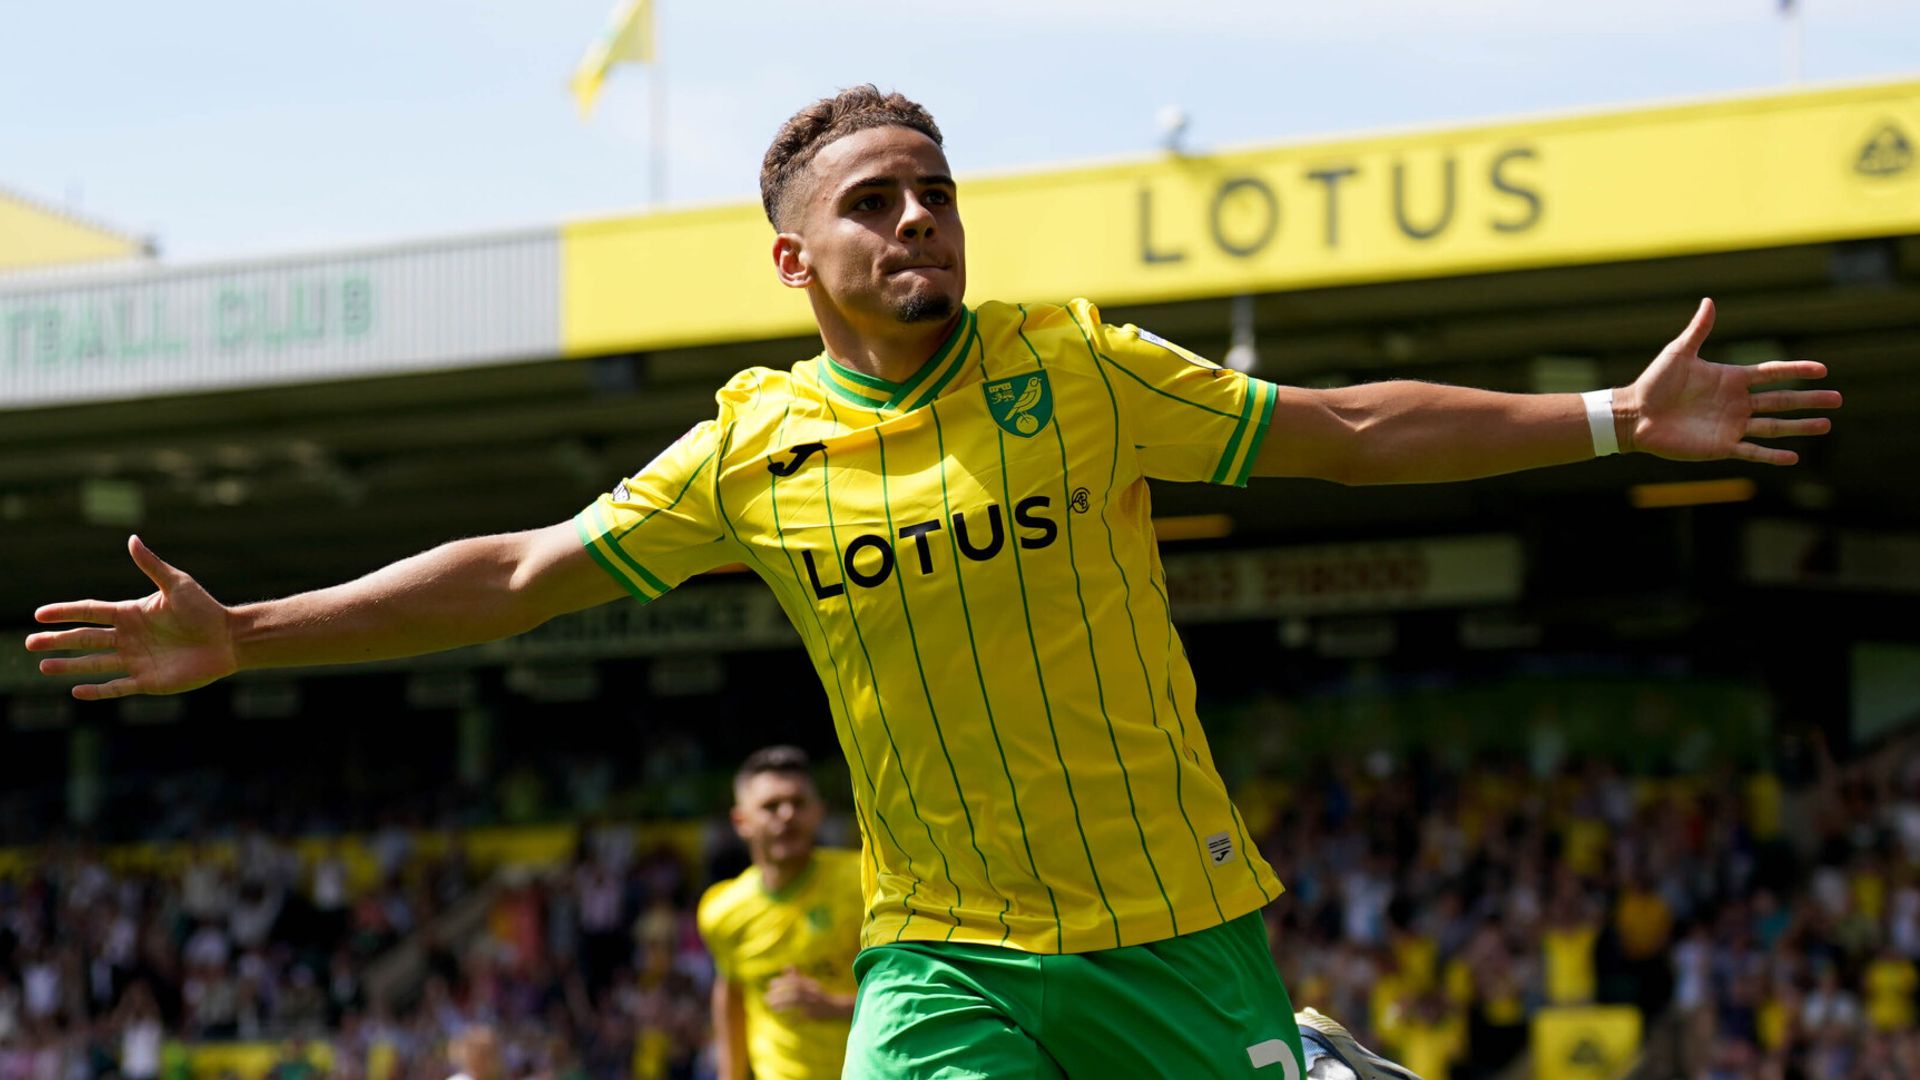 Norwich pick up first point after Wigan scare